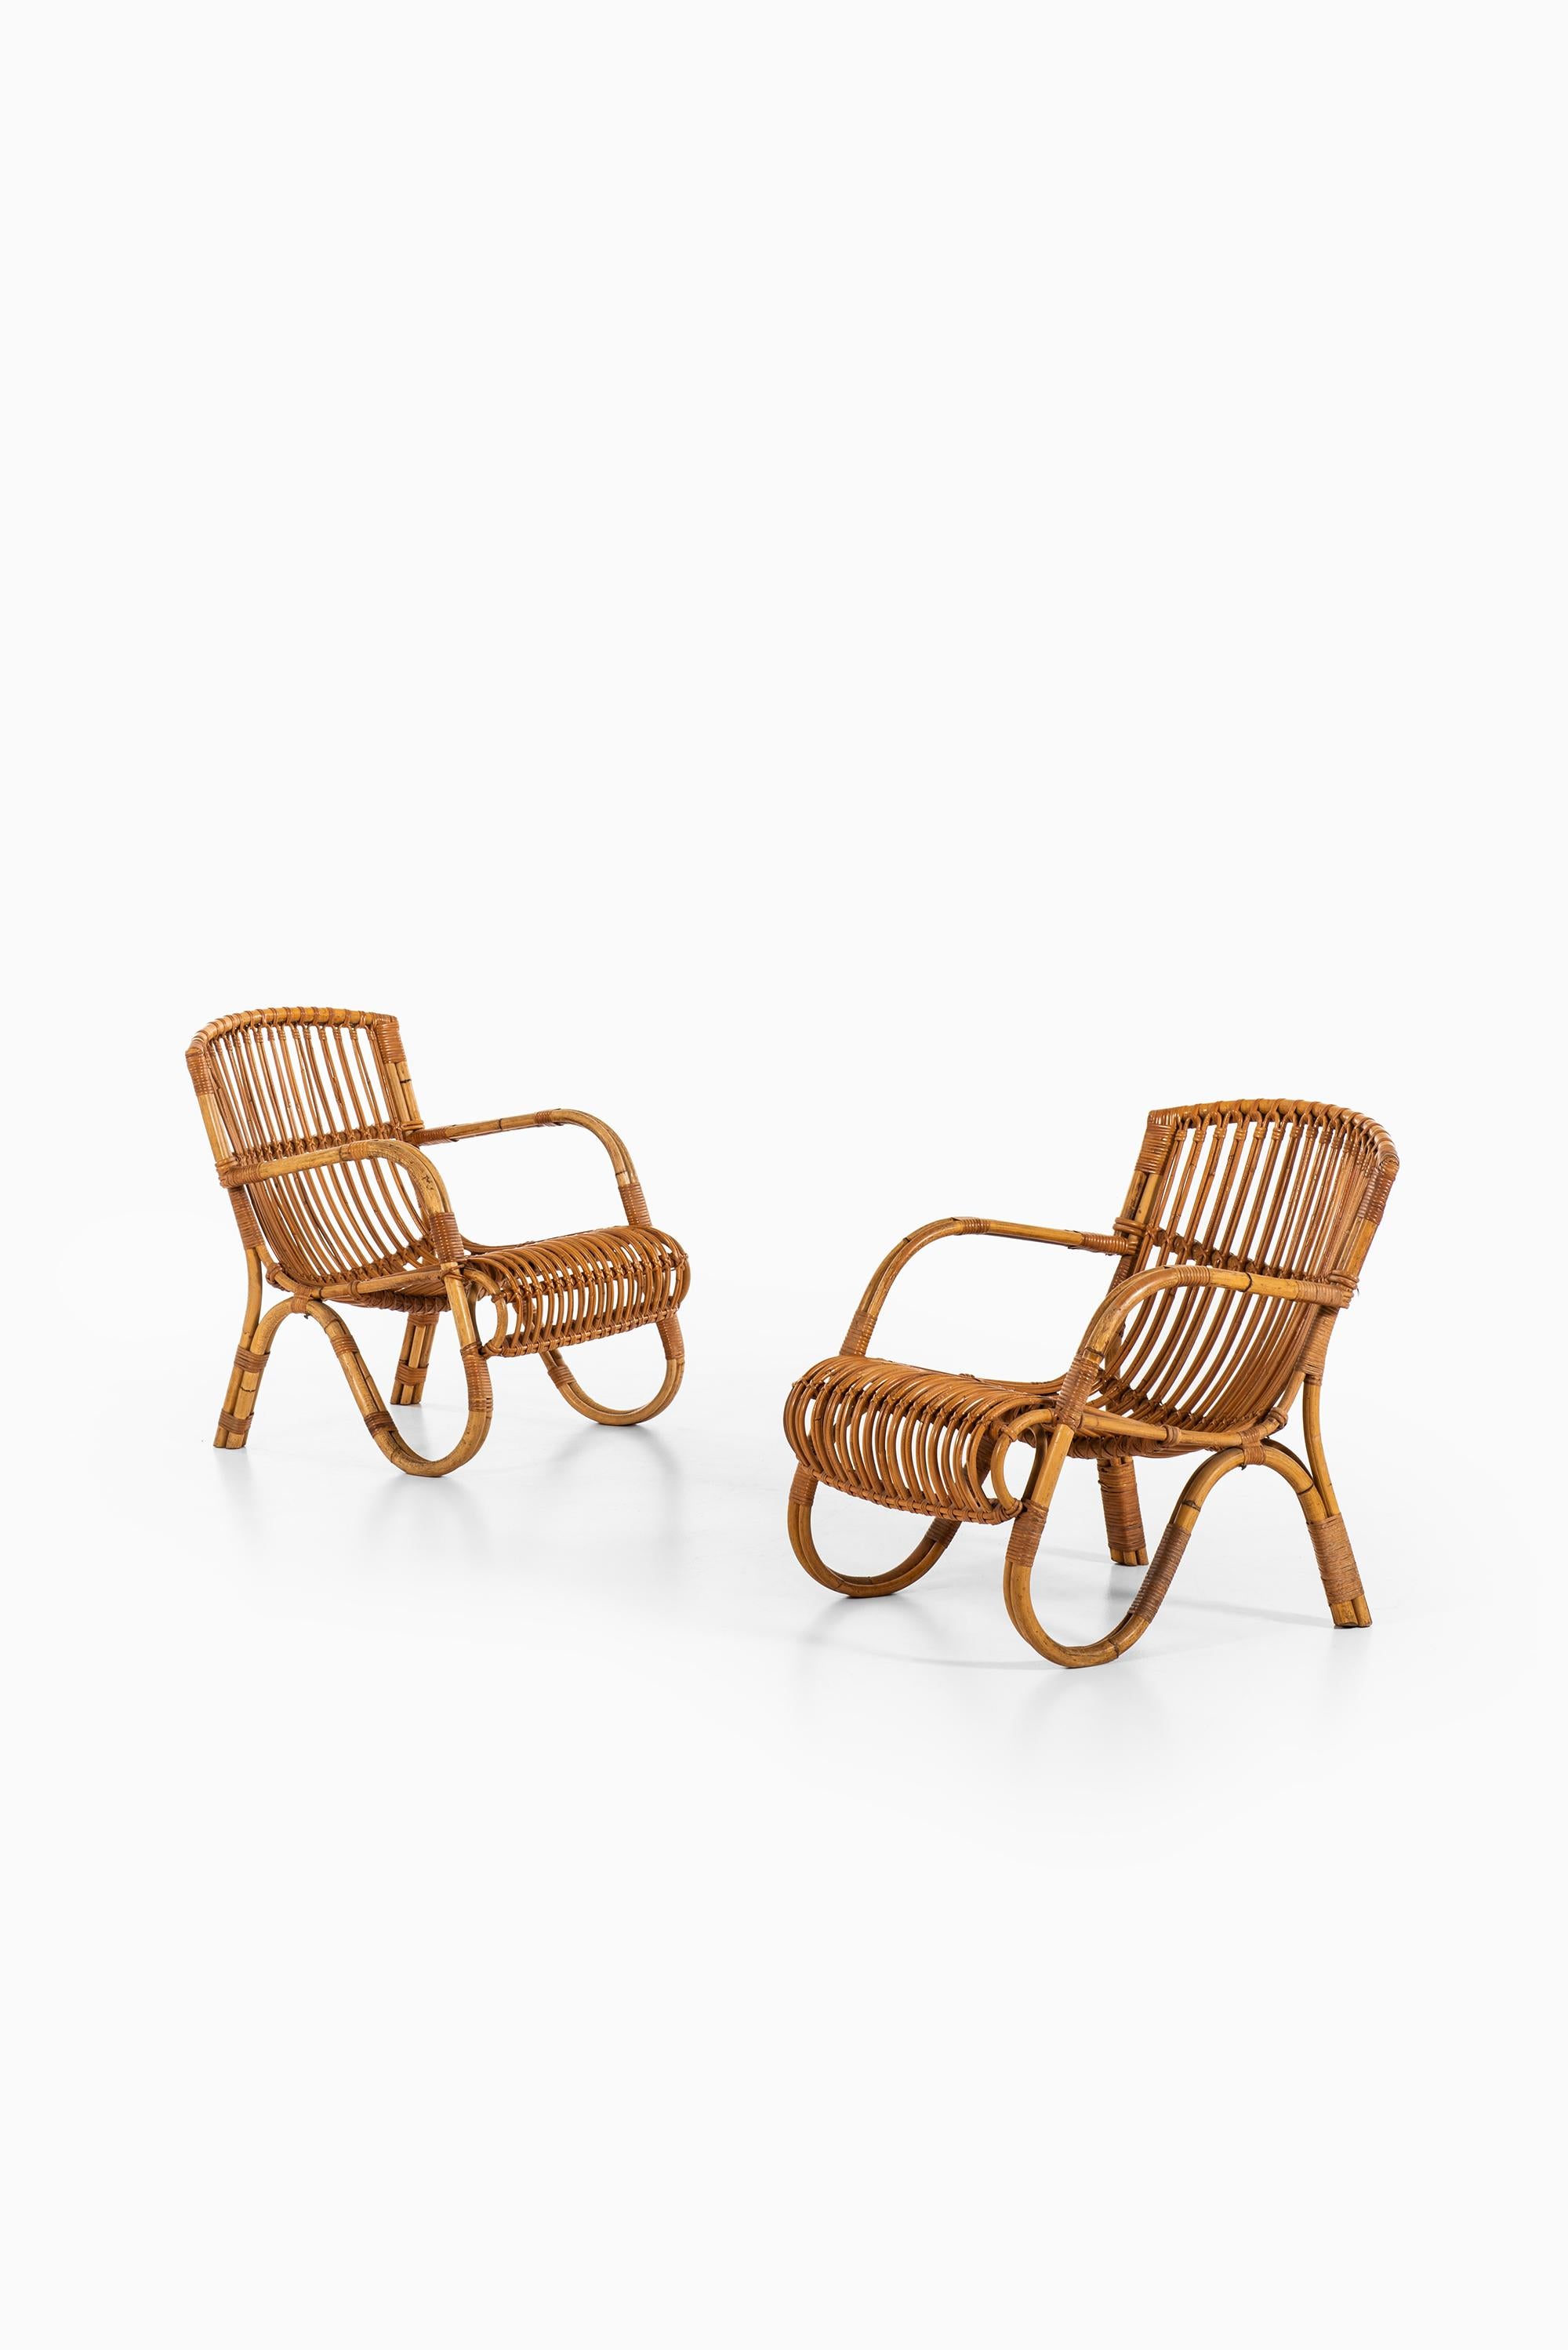 A pair of easy chairs. Produced by E.V.A. Nissen & Co in Denmark.